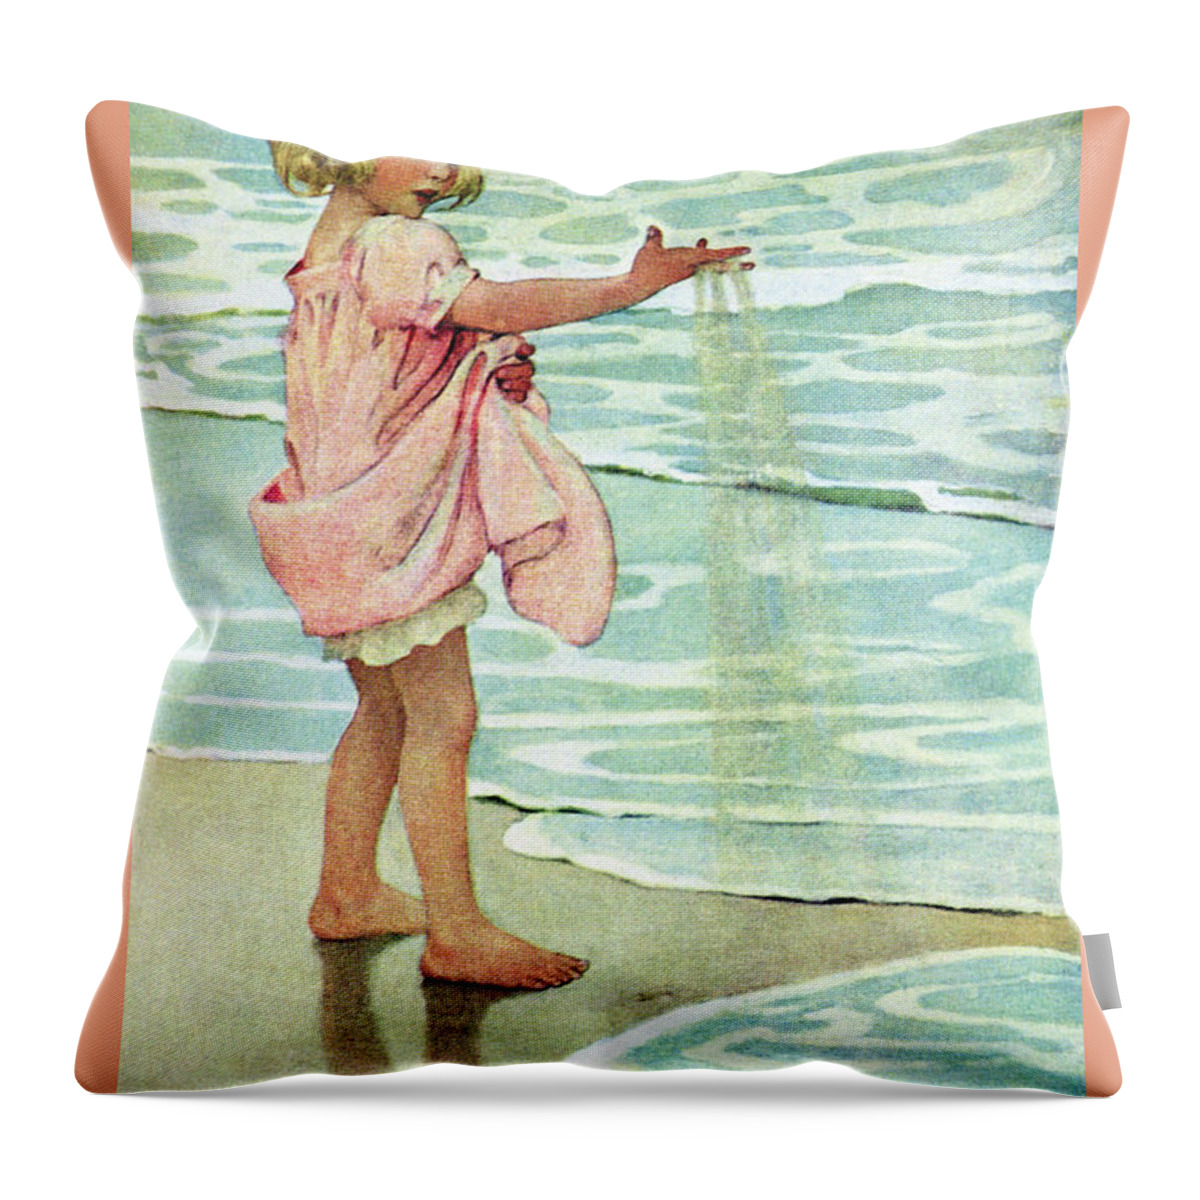 Child Throw Pillow featuring the painting Little Drops by Jessie Willcox Smith